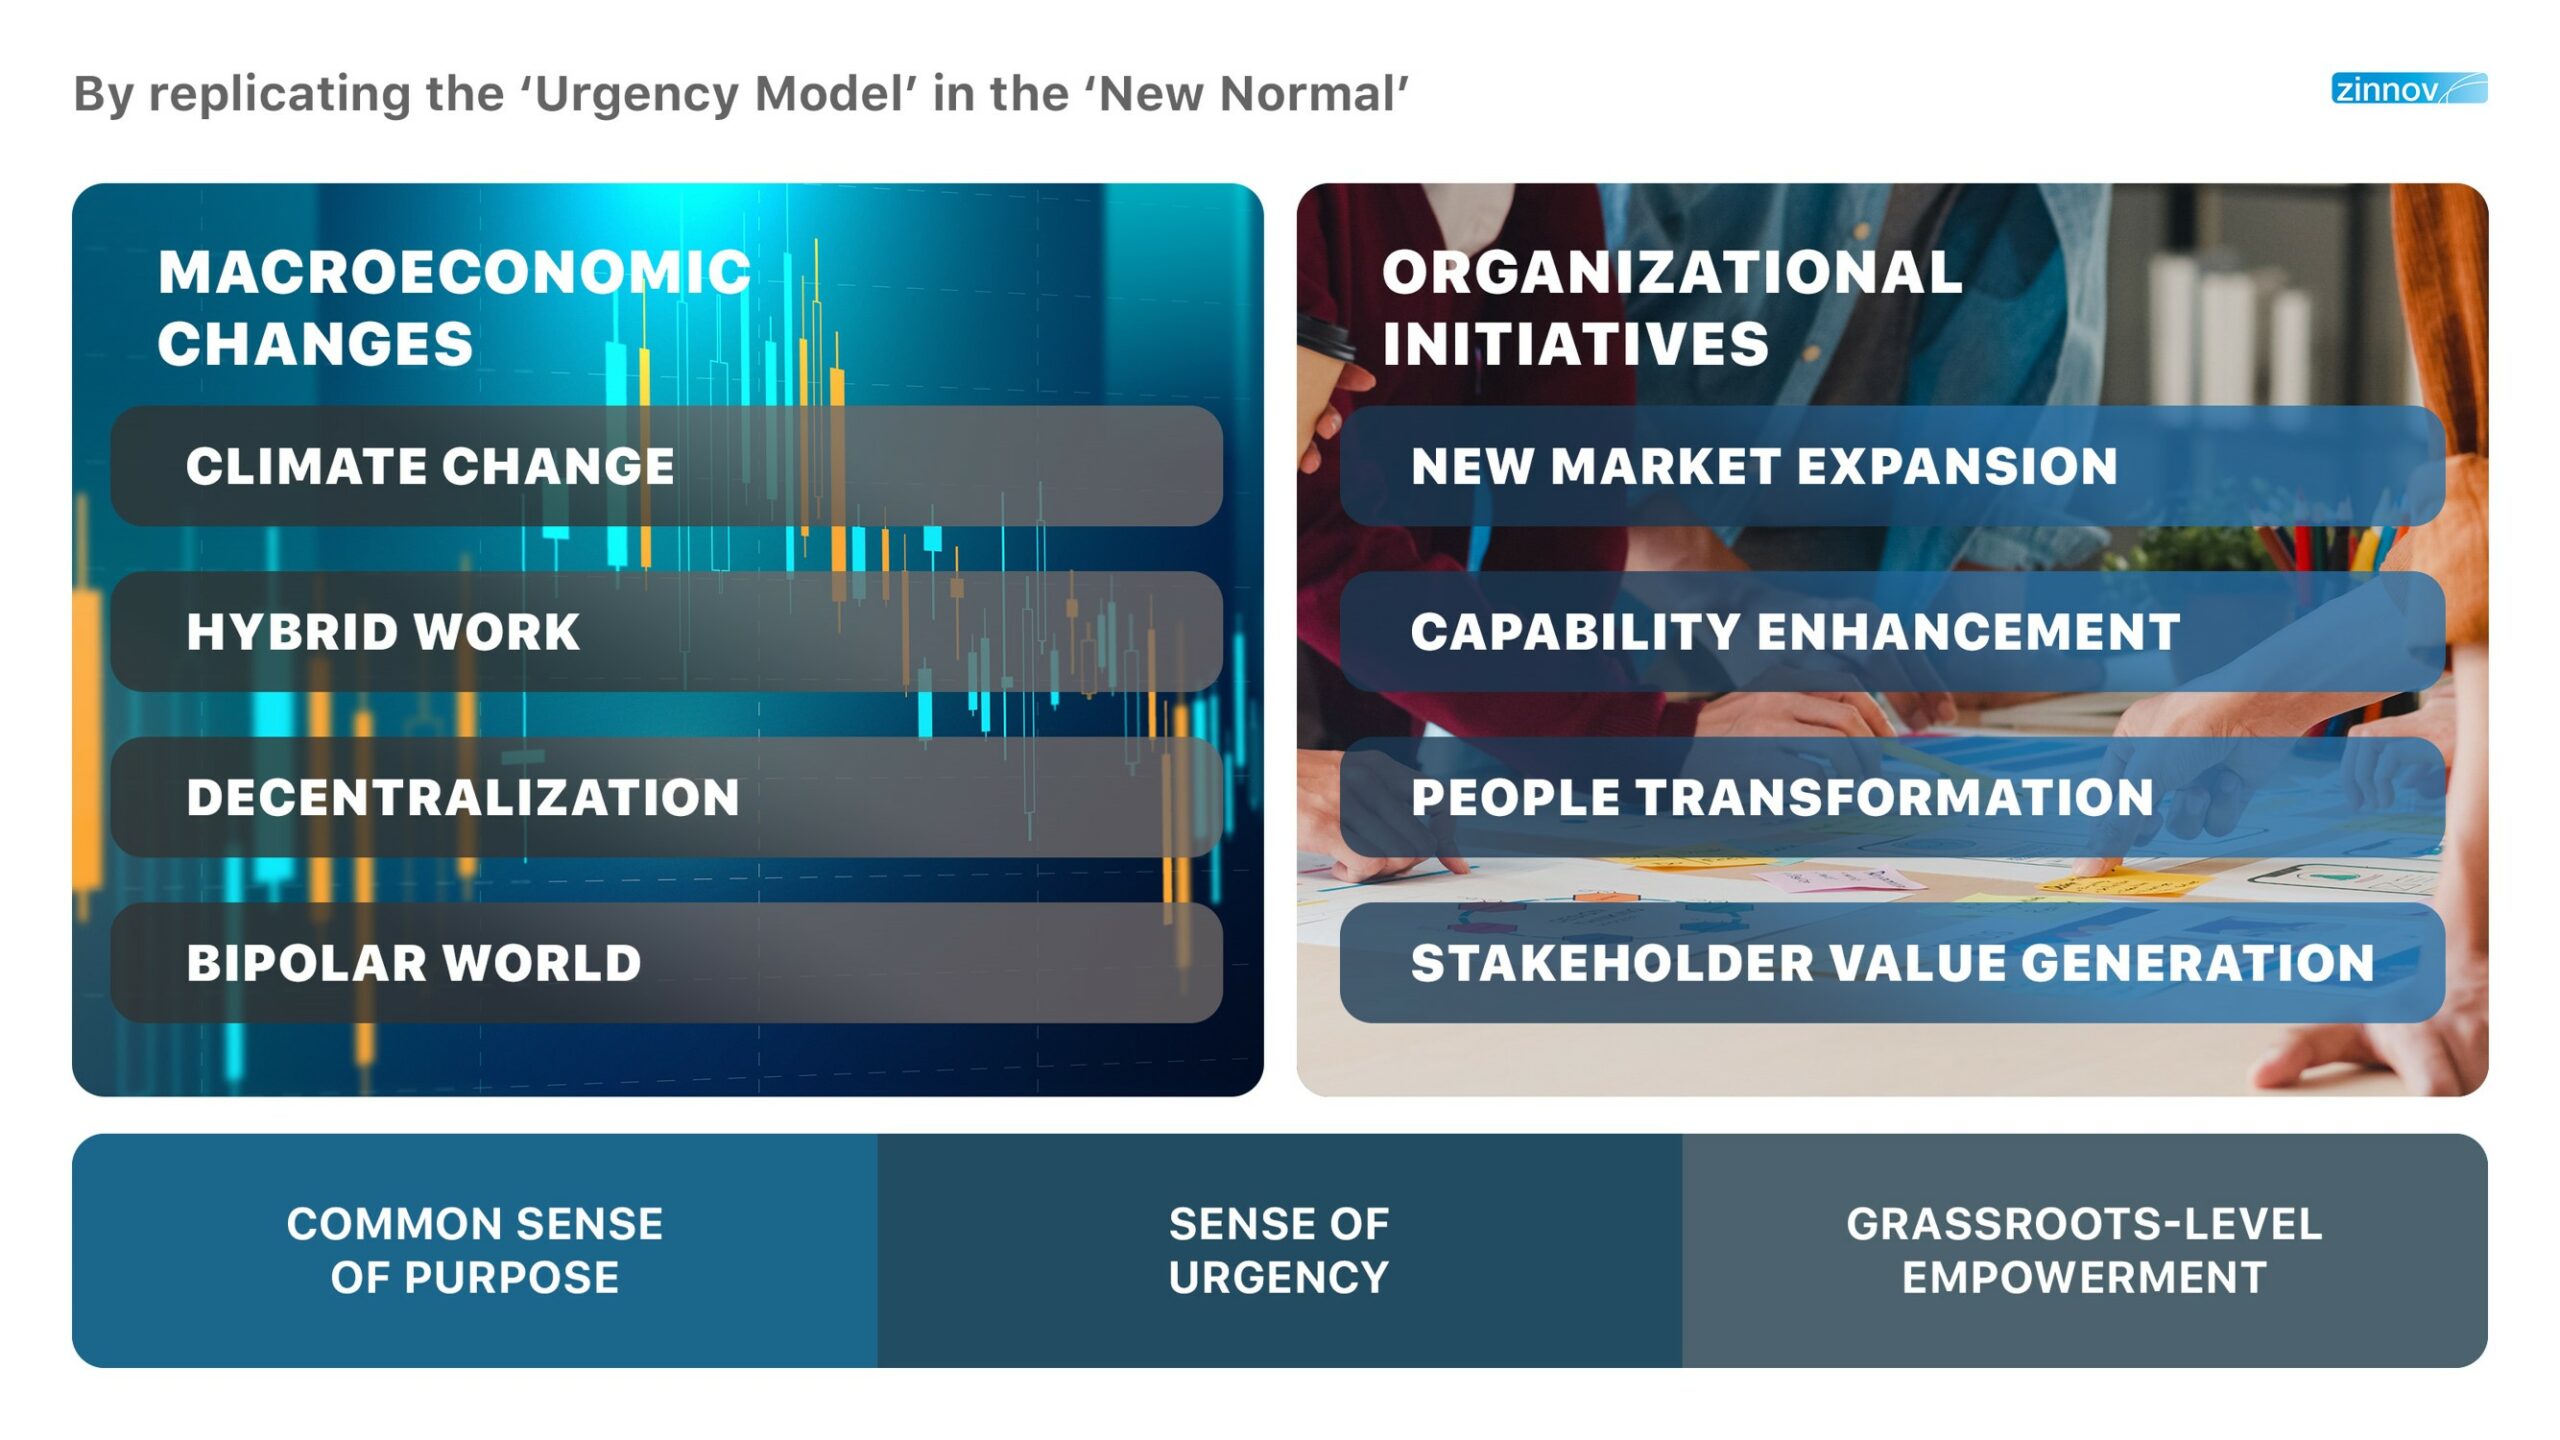 replicating the ‘Urgency Model’ in the New Normal